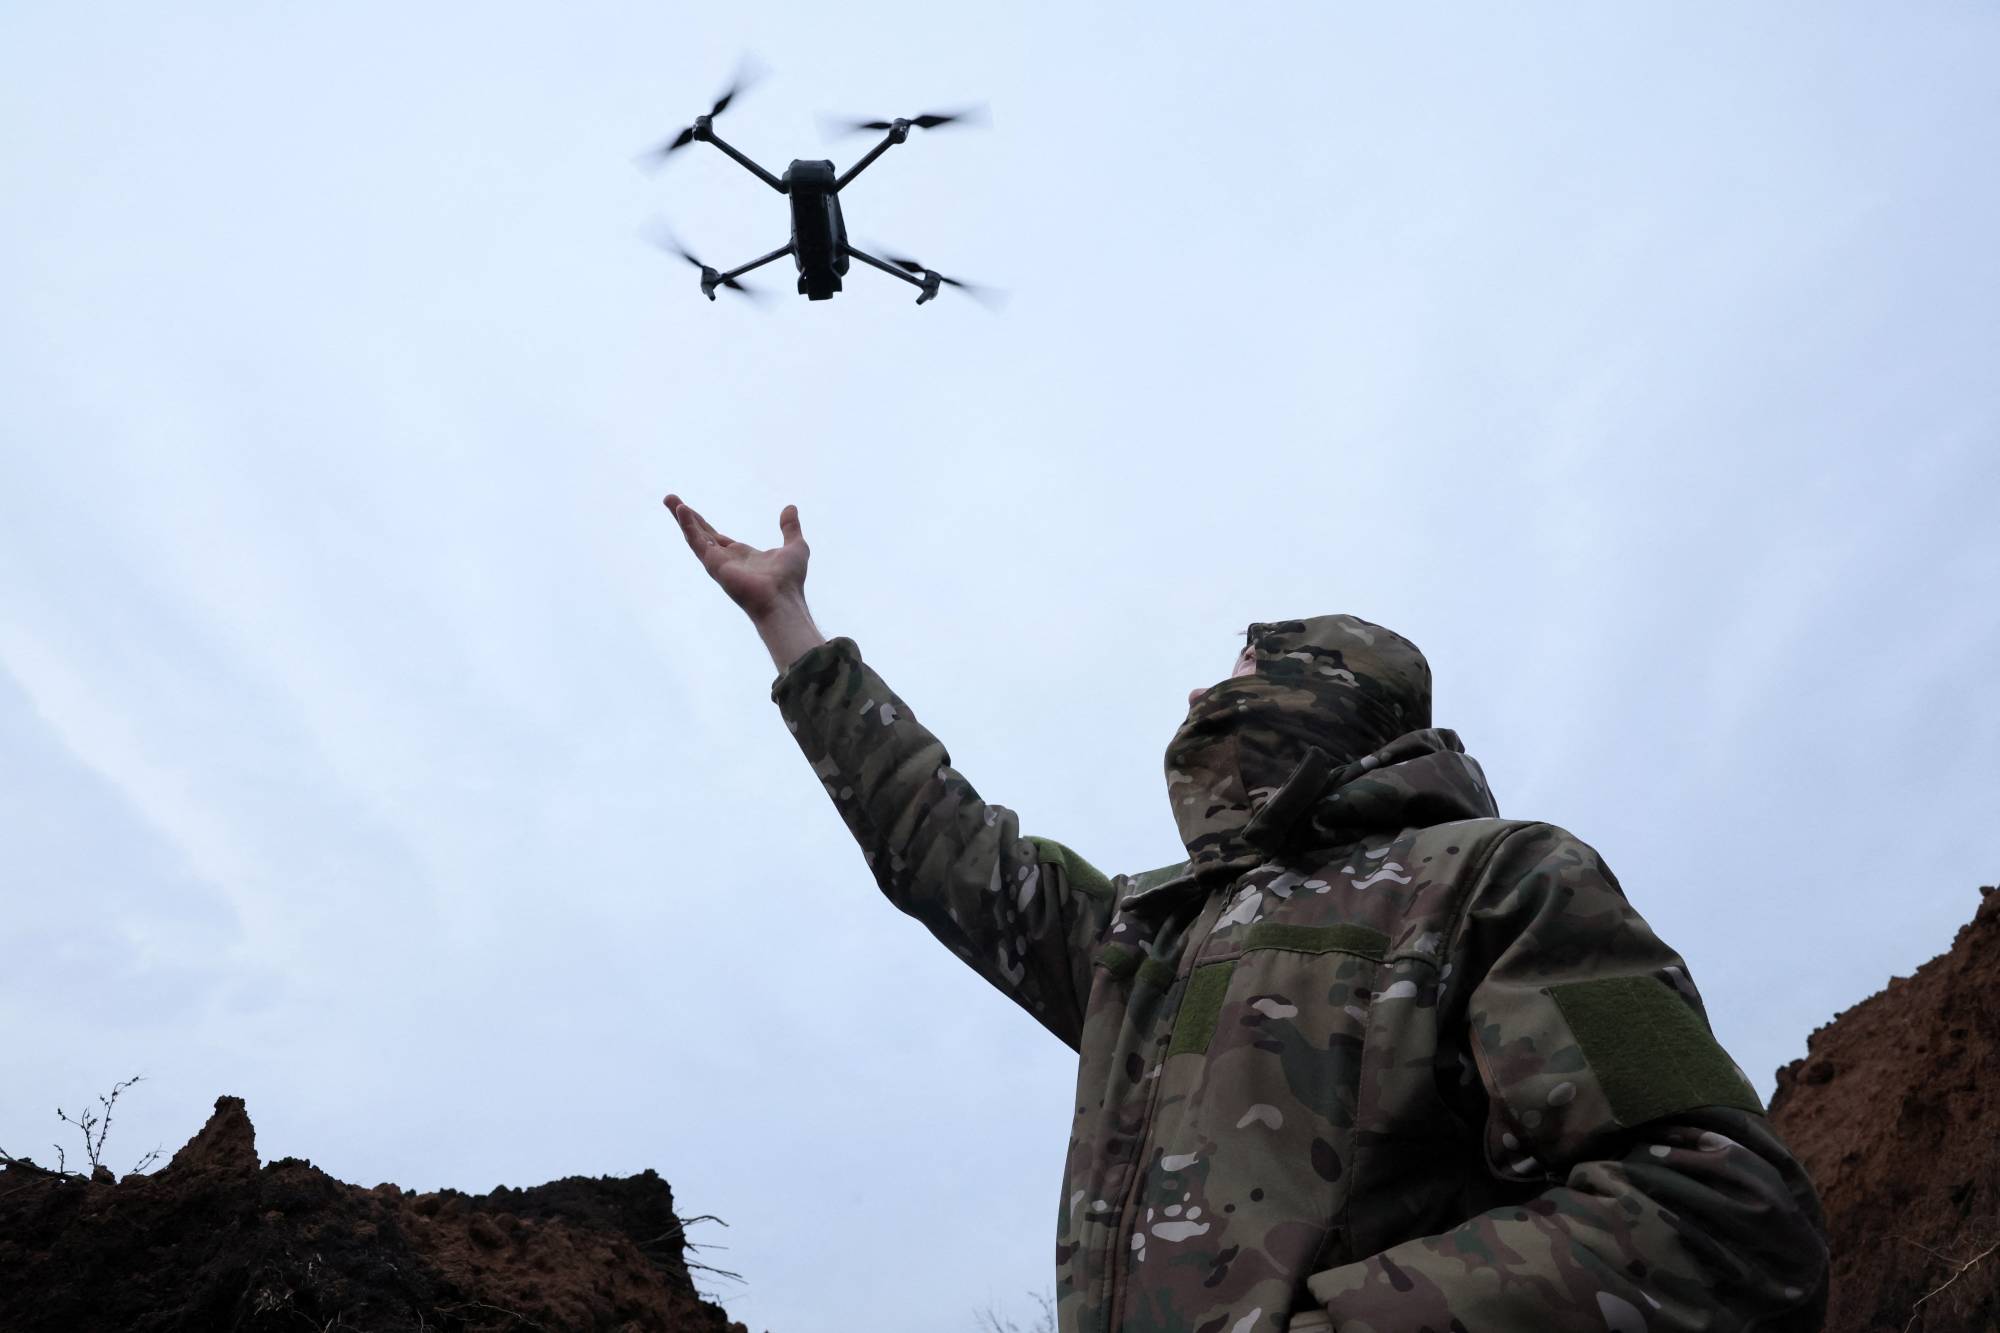 A Ukrainian Army soldier tests a drone near Bakhmut, Ukraine, on Nov. 25. Embracing cutting-edge technology throughout their military is becoming key for countries facing conflict. | REUTERS